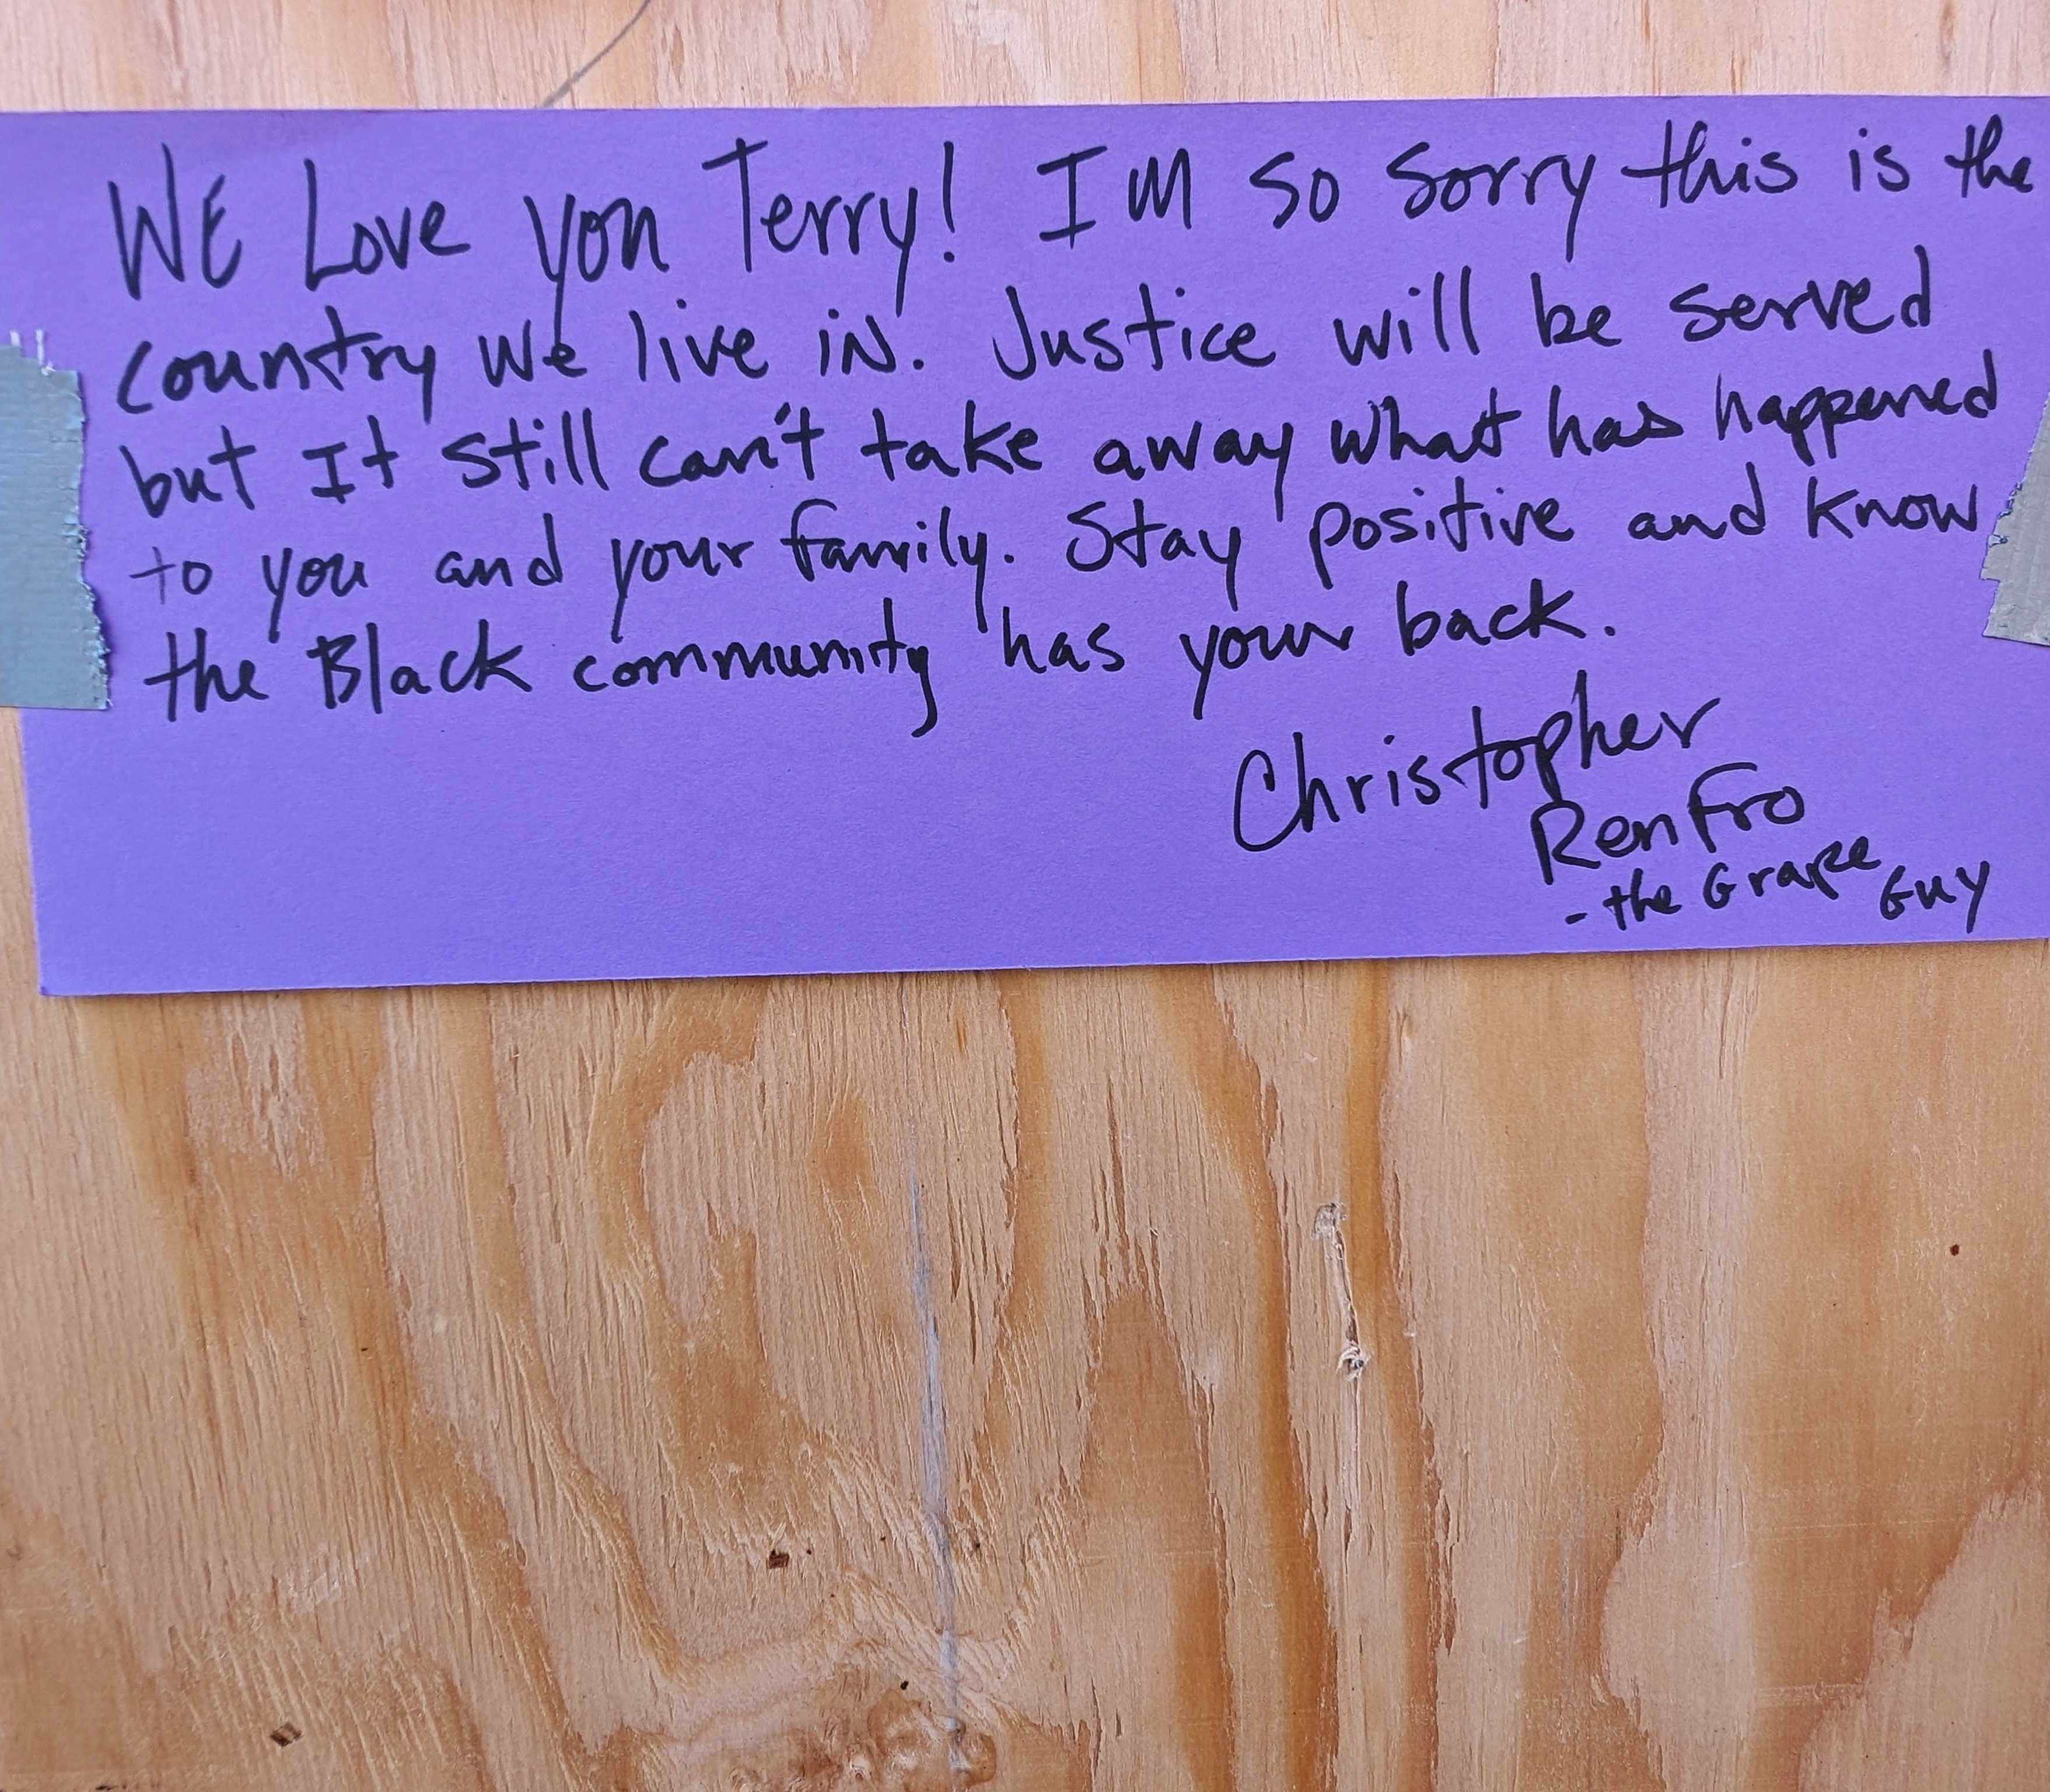 A handwritten message on purple paper, taped to a wooden surface, expresses support for a person named Terry and mentions justice and community solidarity.